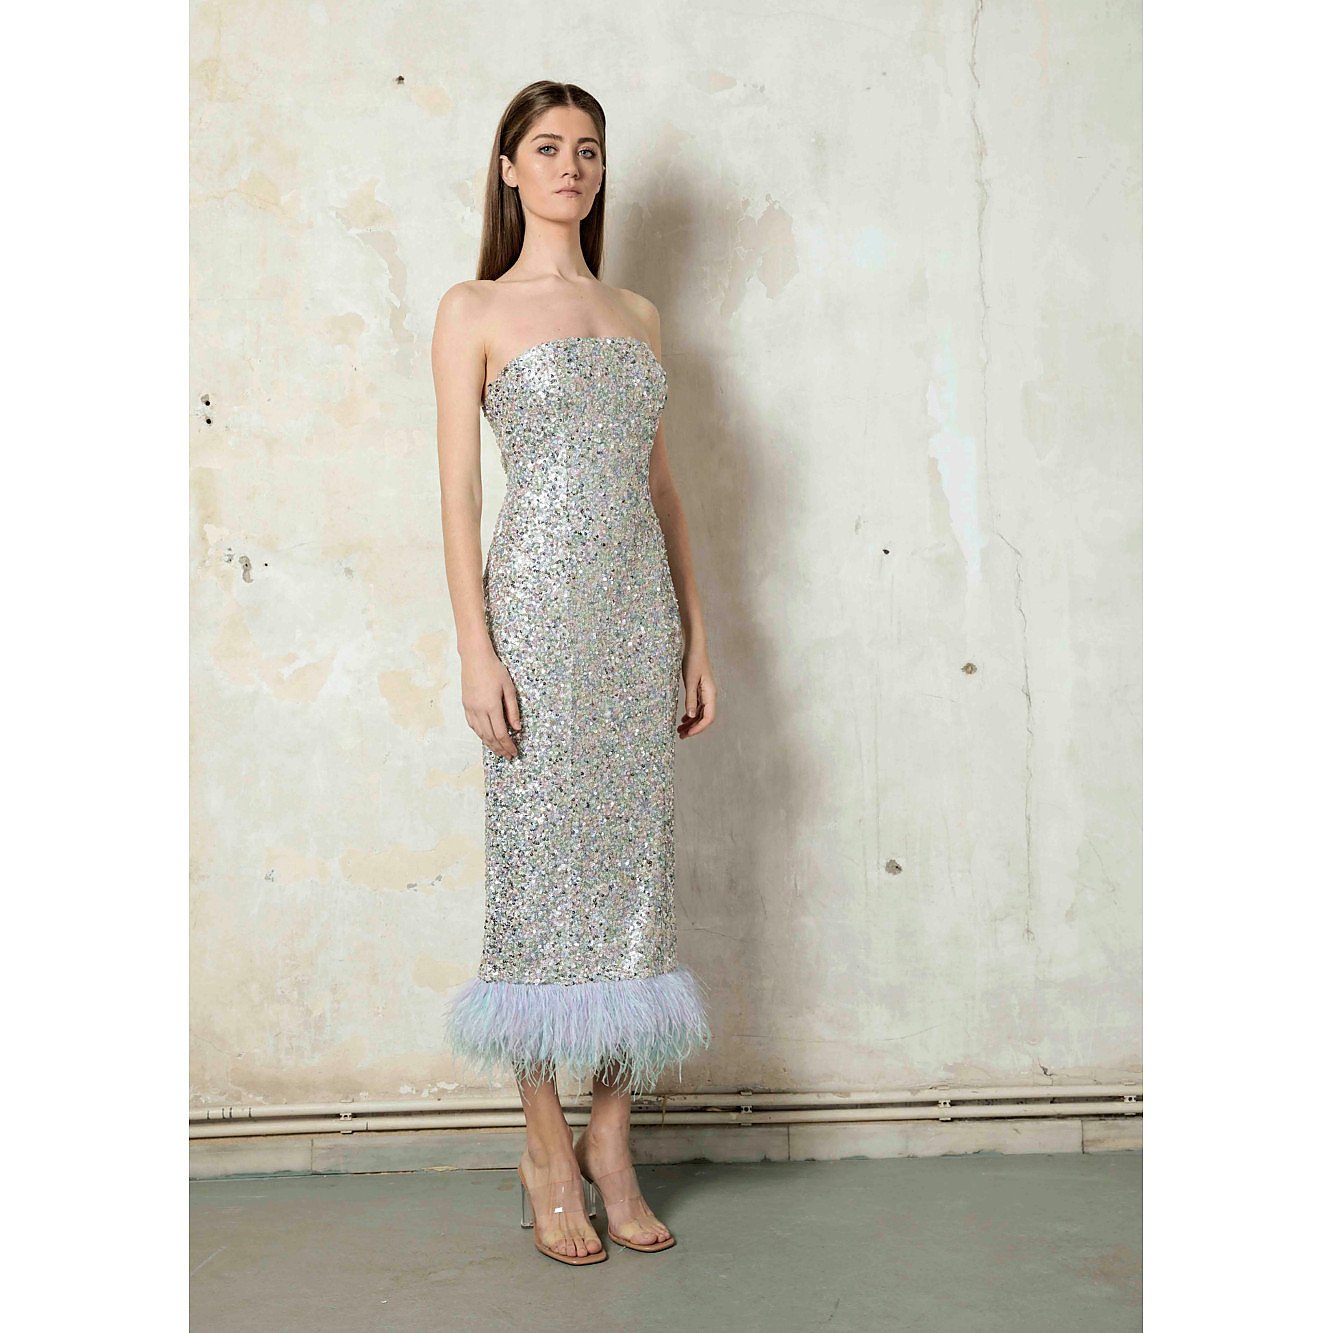 F.ILKK Sequined Feather Dress